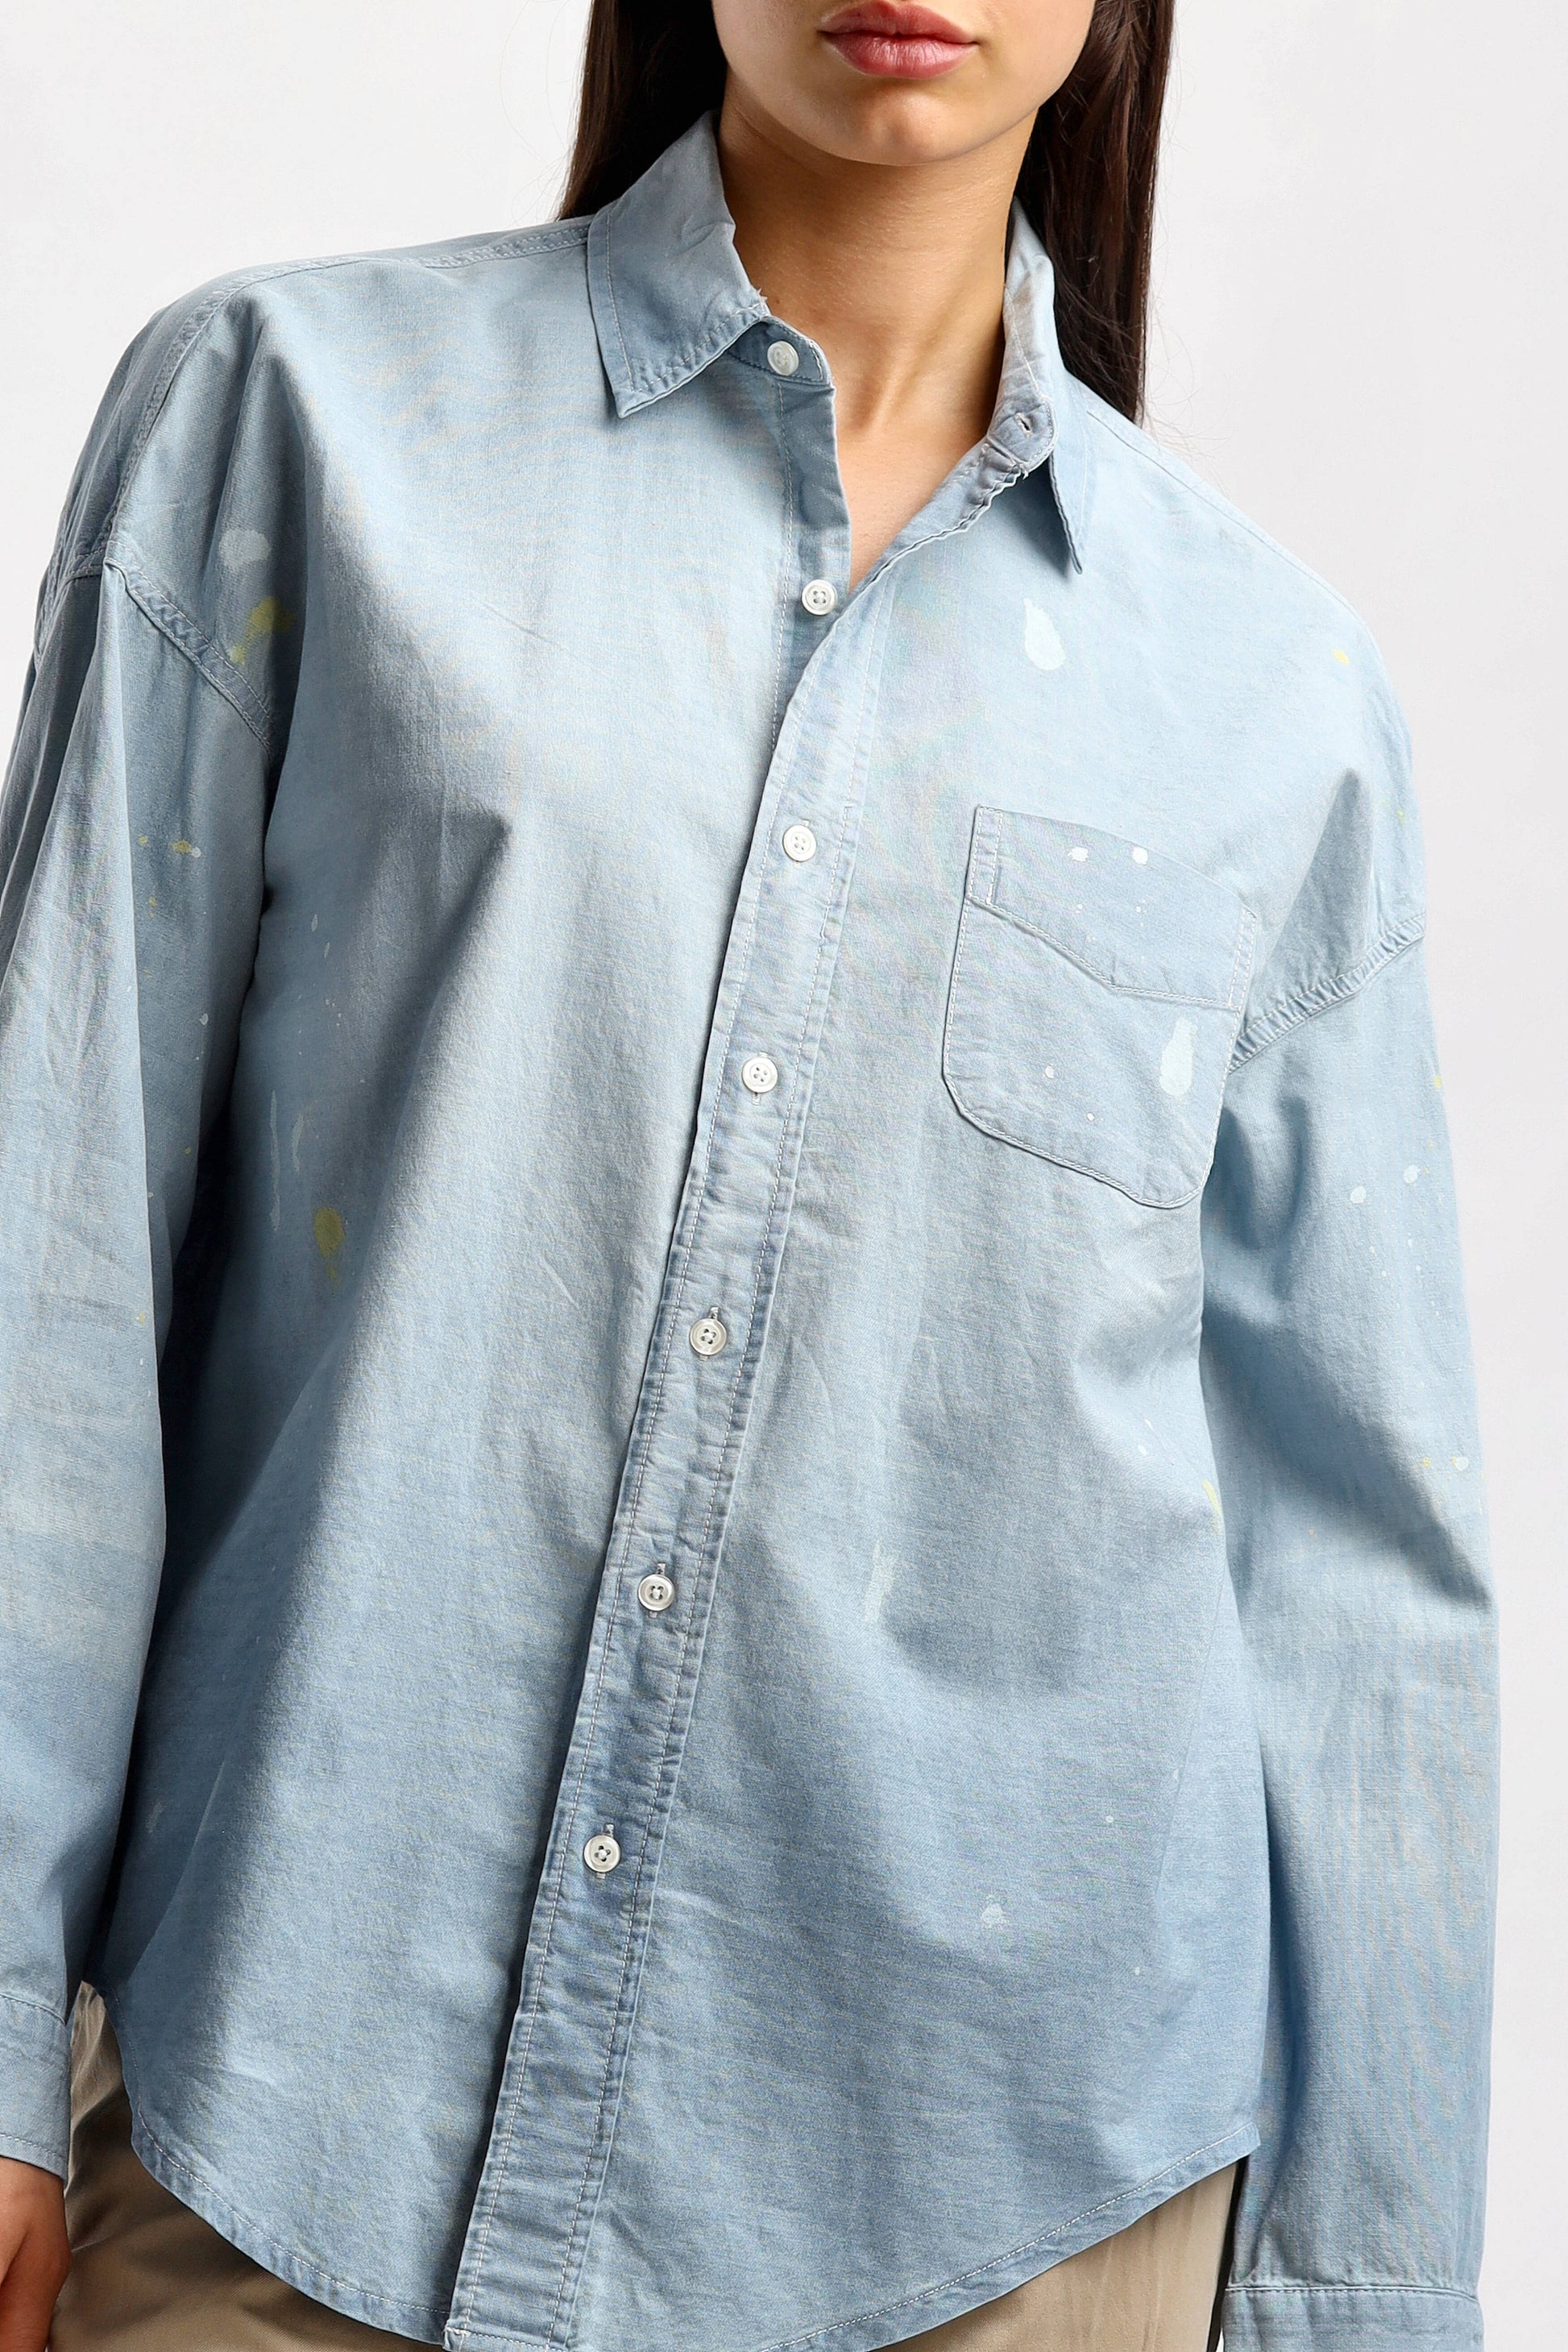 Bluse Boxy Button Up in Vintage BlueR13 - Anita Hass